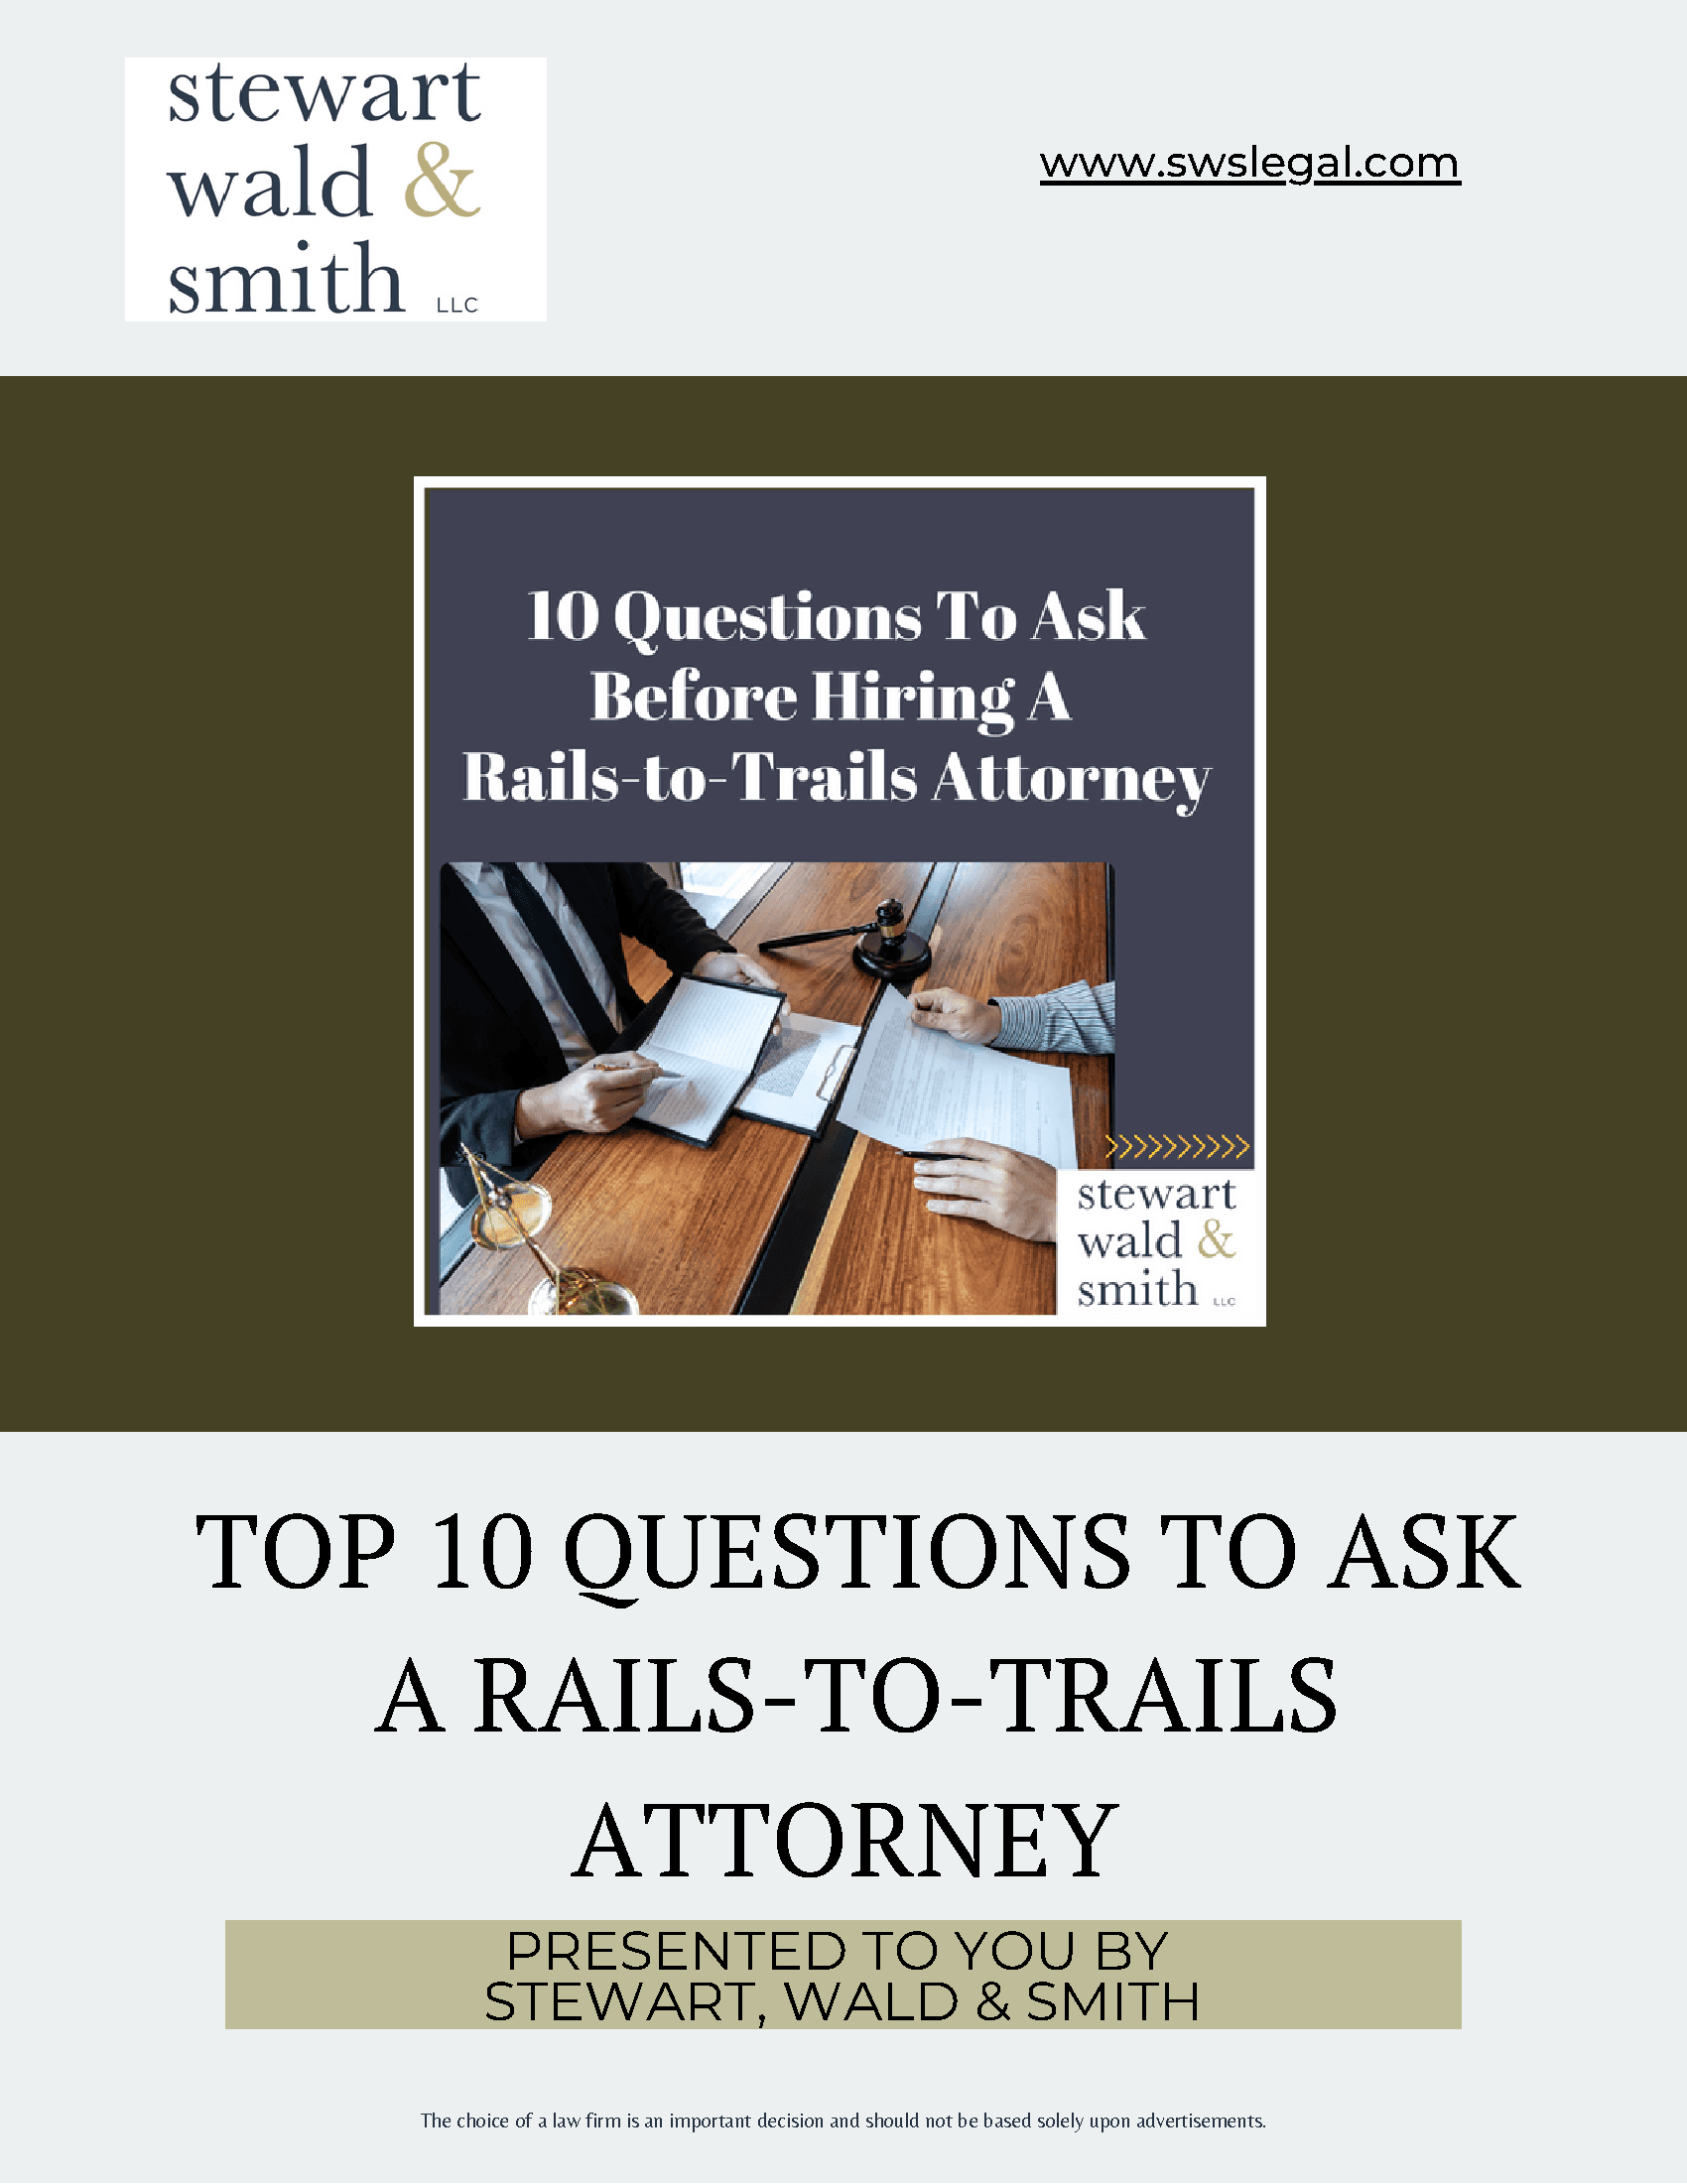 10 Questions to Ask Before Hiring a Rails-to-Trails Attorney